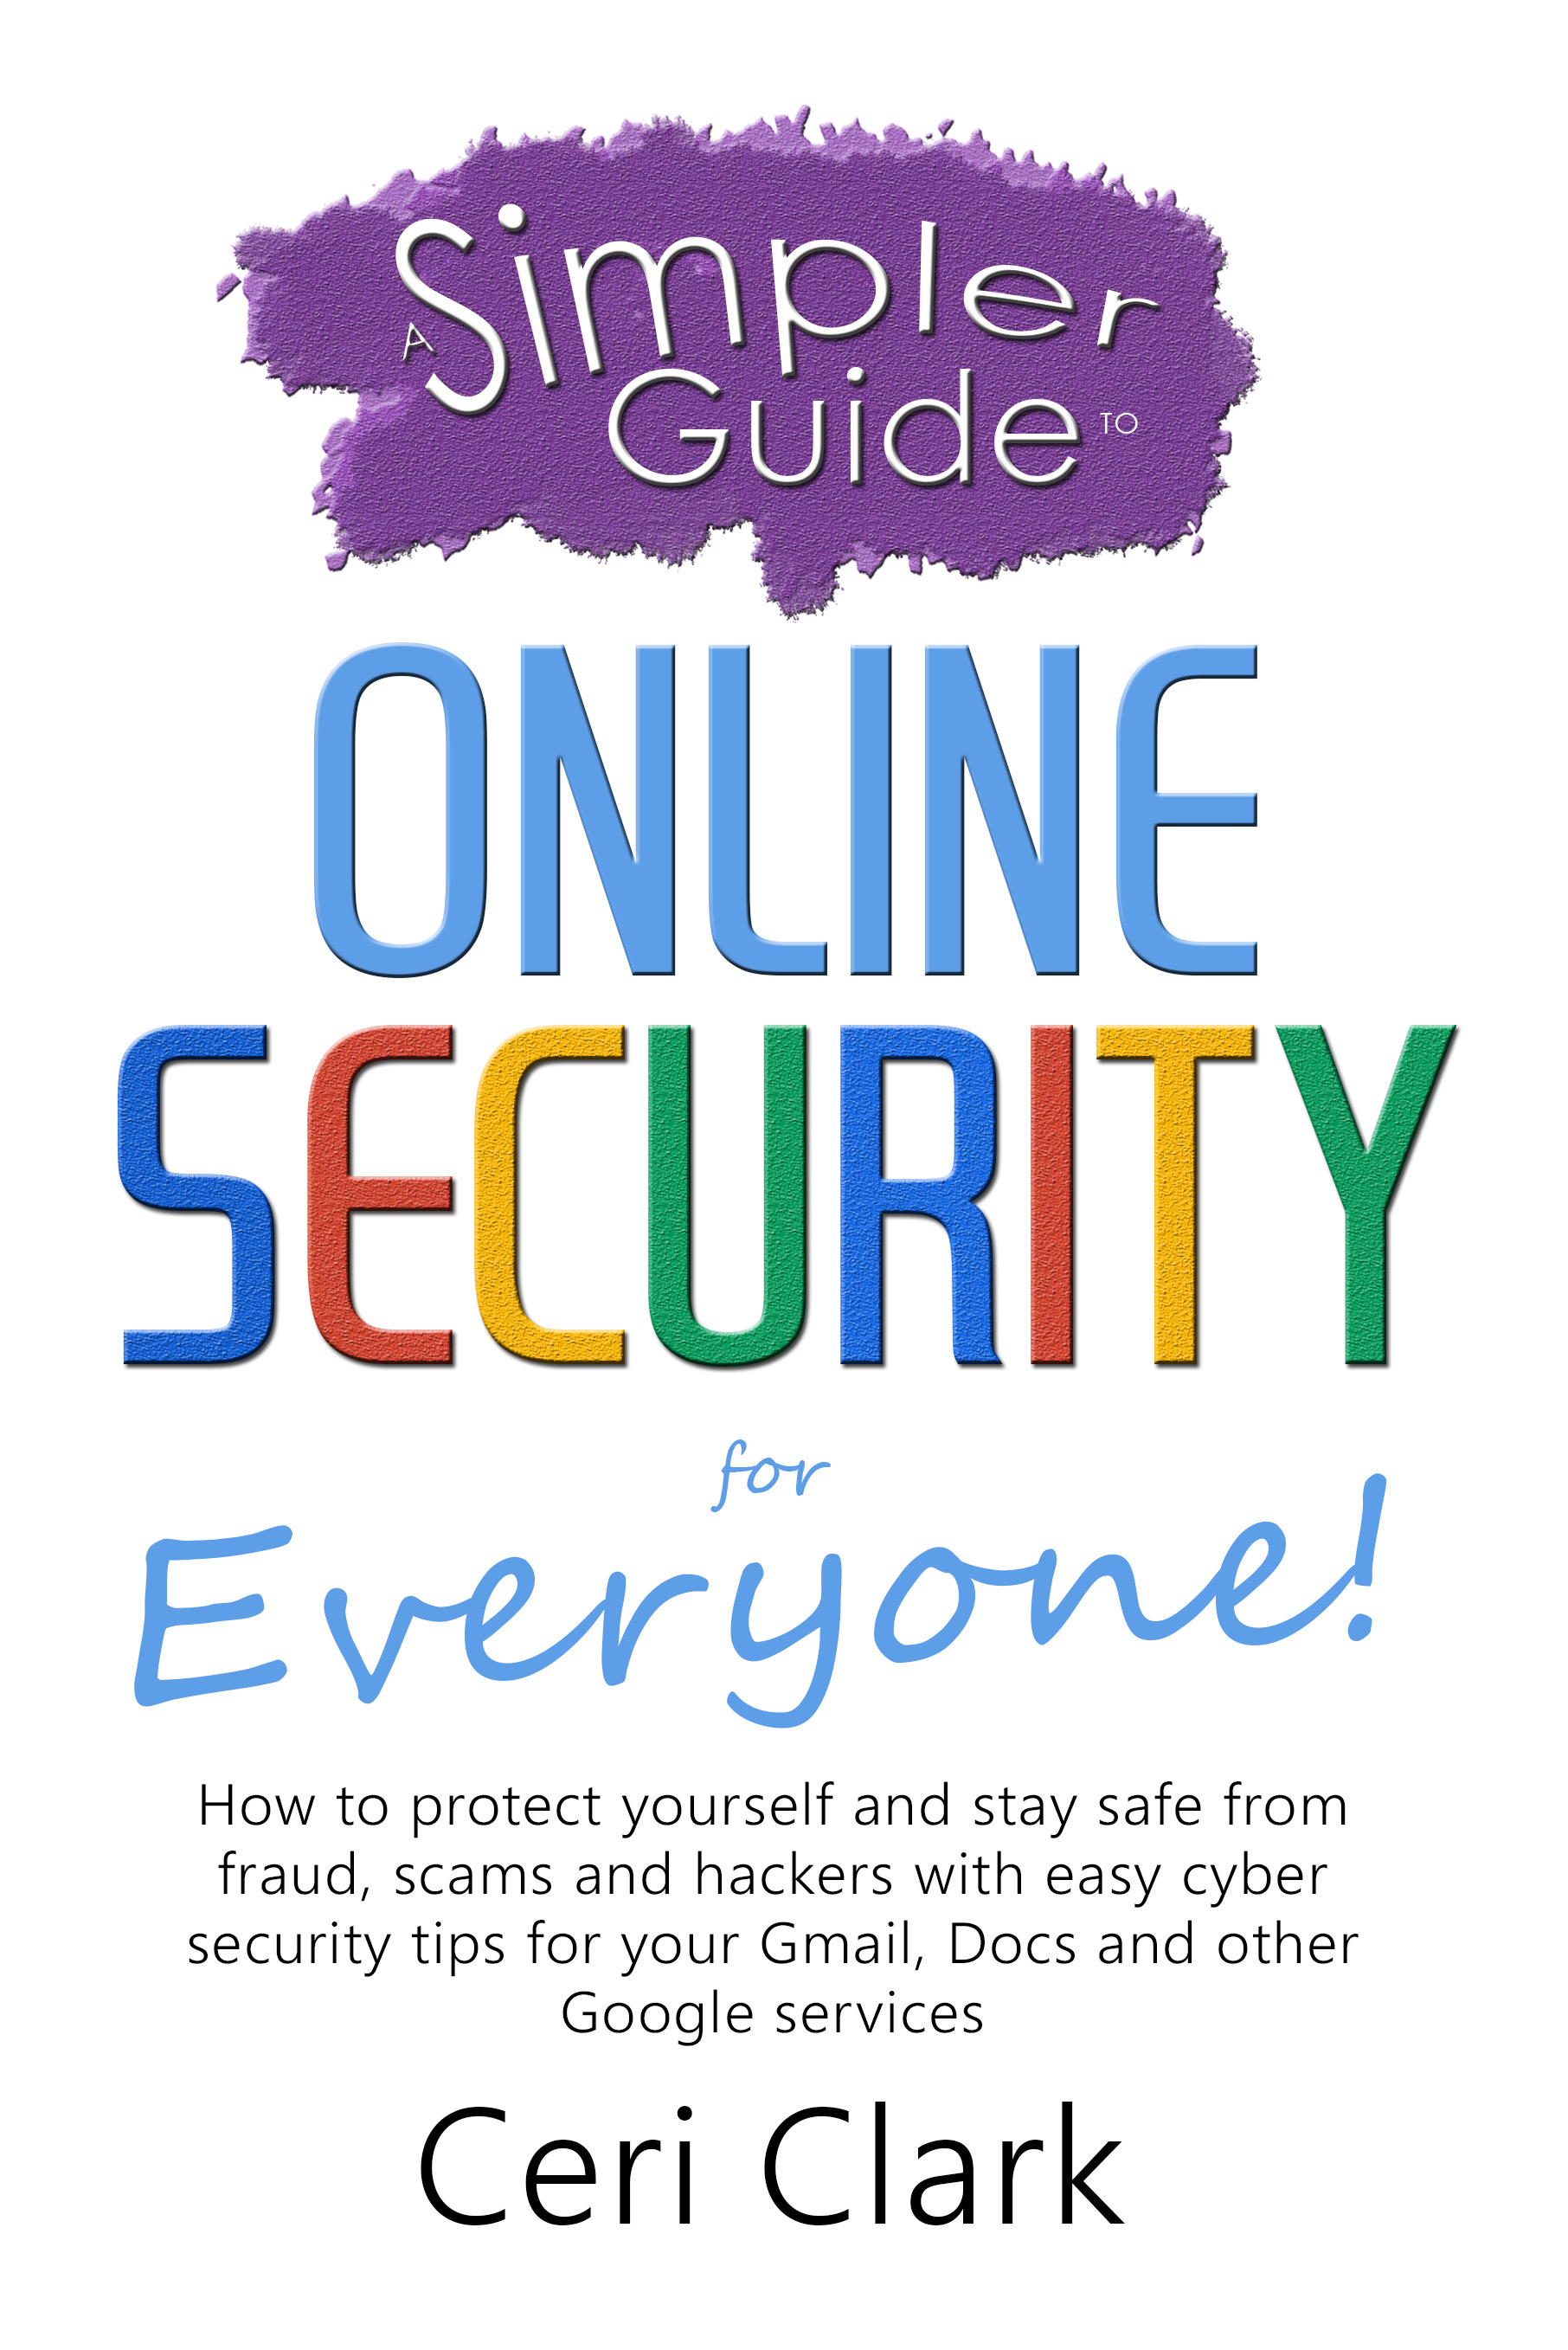 A Simpler Guide to Online Security for Everyone: How to protect yourself and stay safe from fraud, scams and hackers with easy cyber security tips